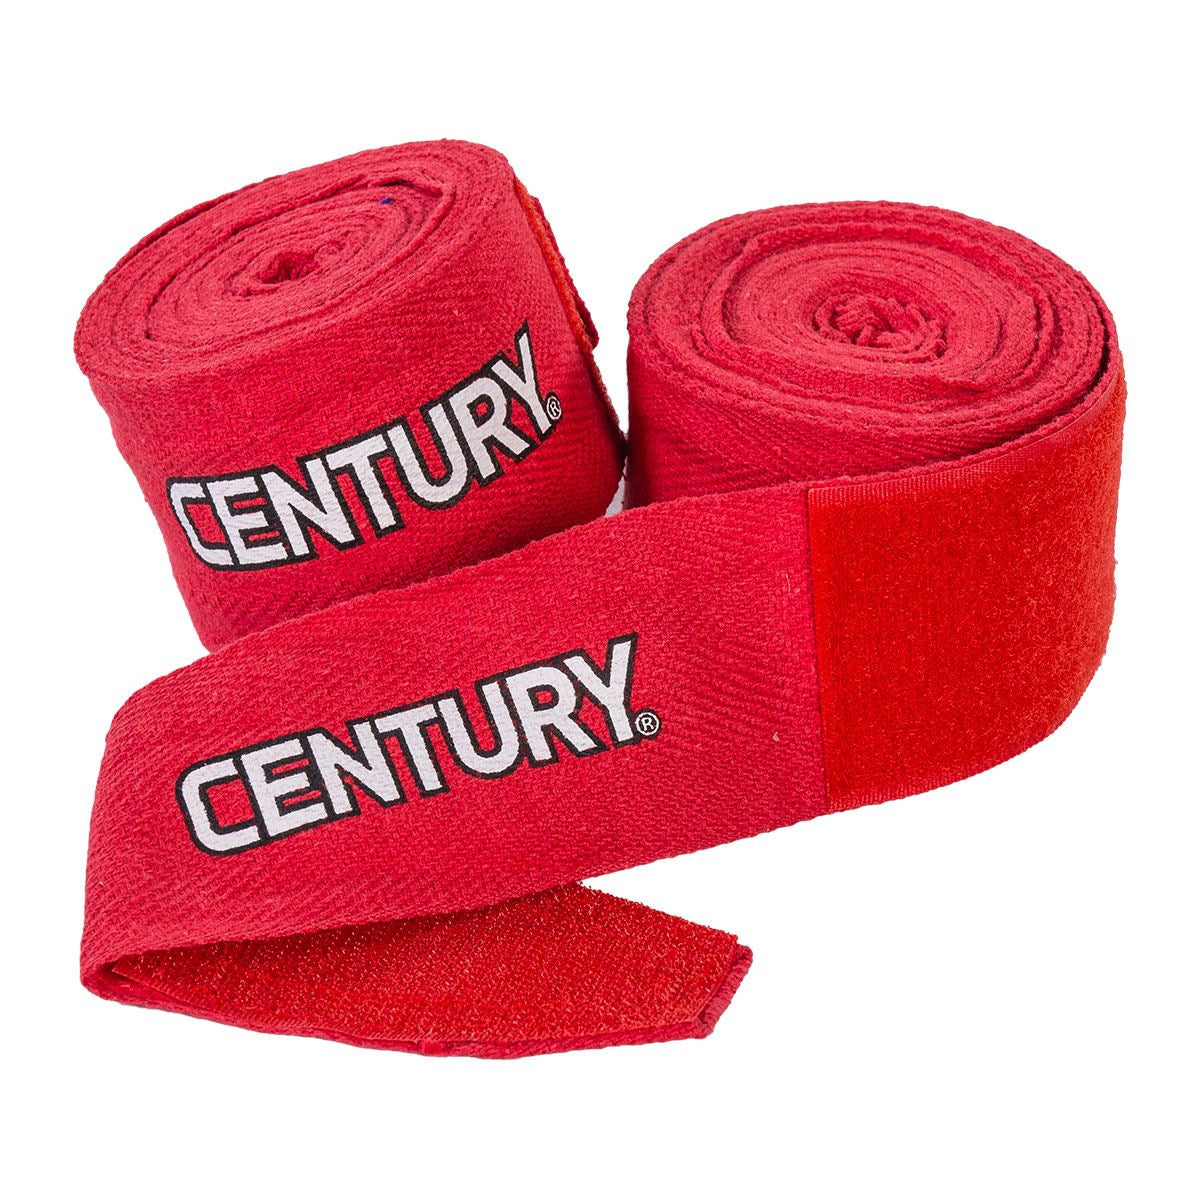 108" Cotton Hand Wraps red in color with century printed on end in bold letters. 